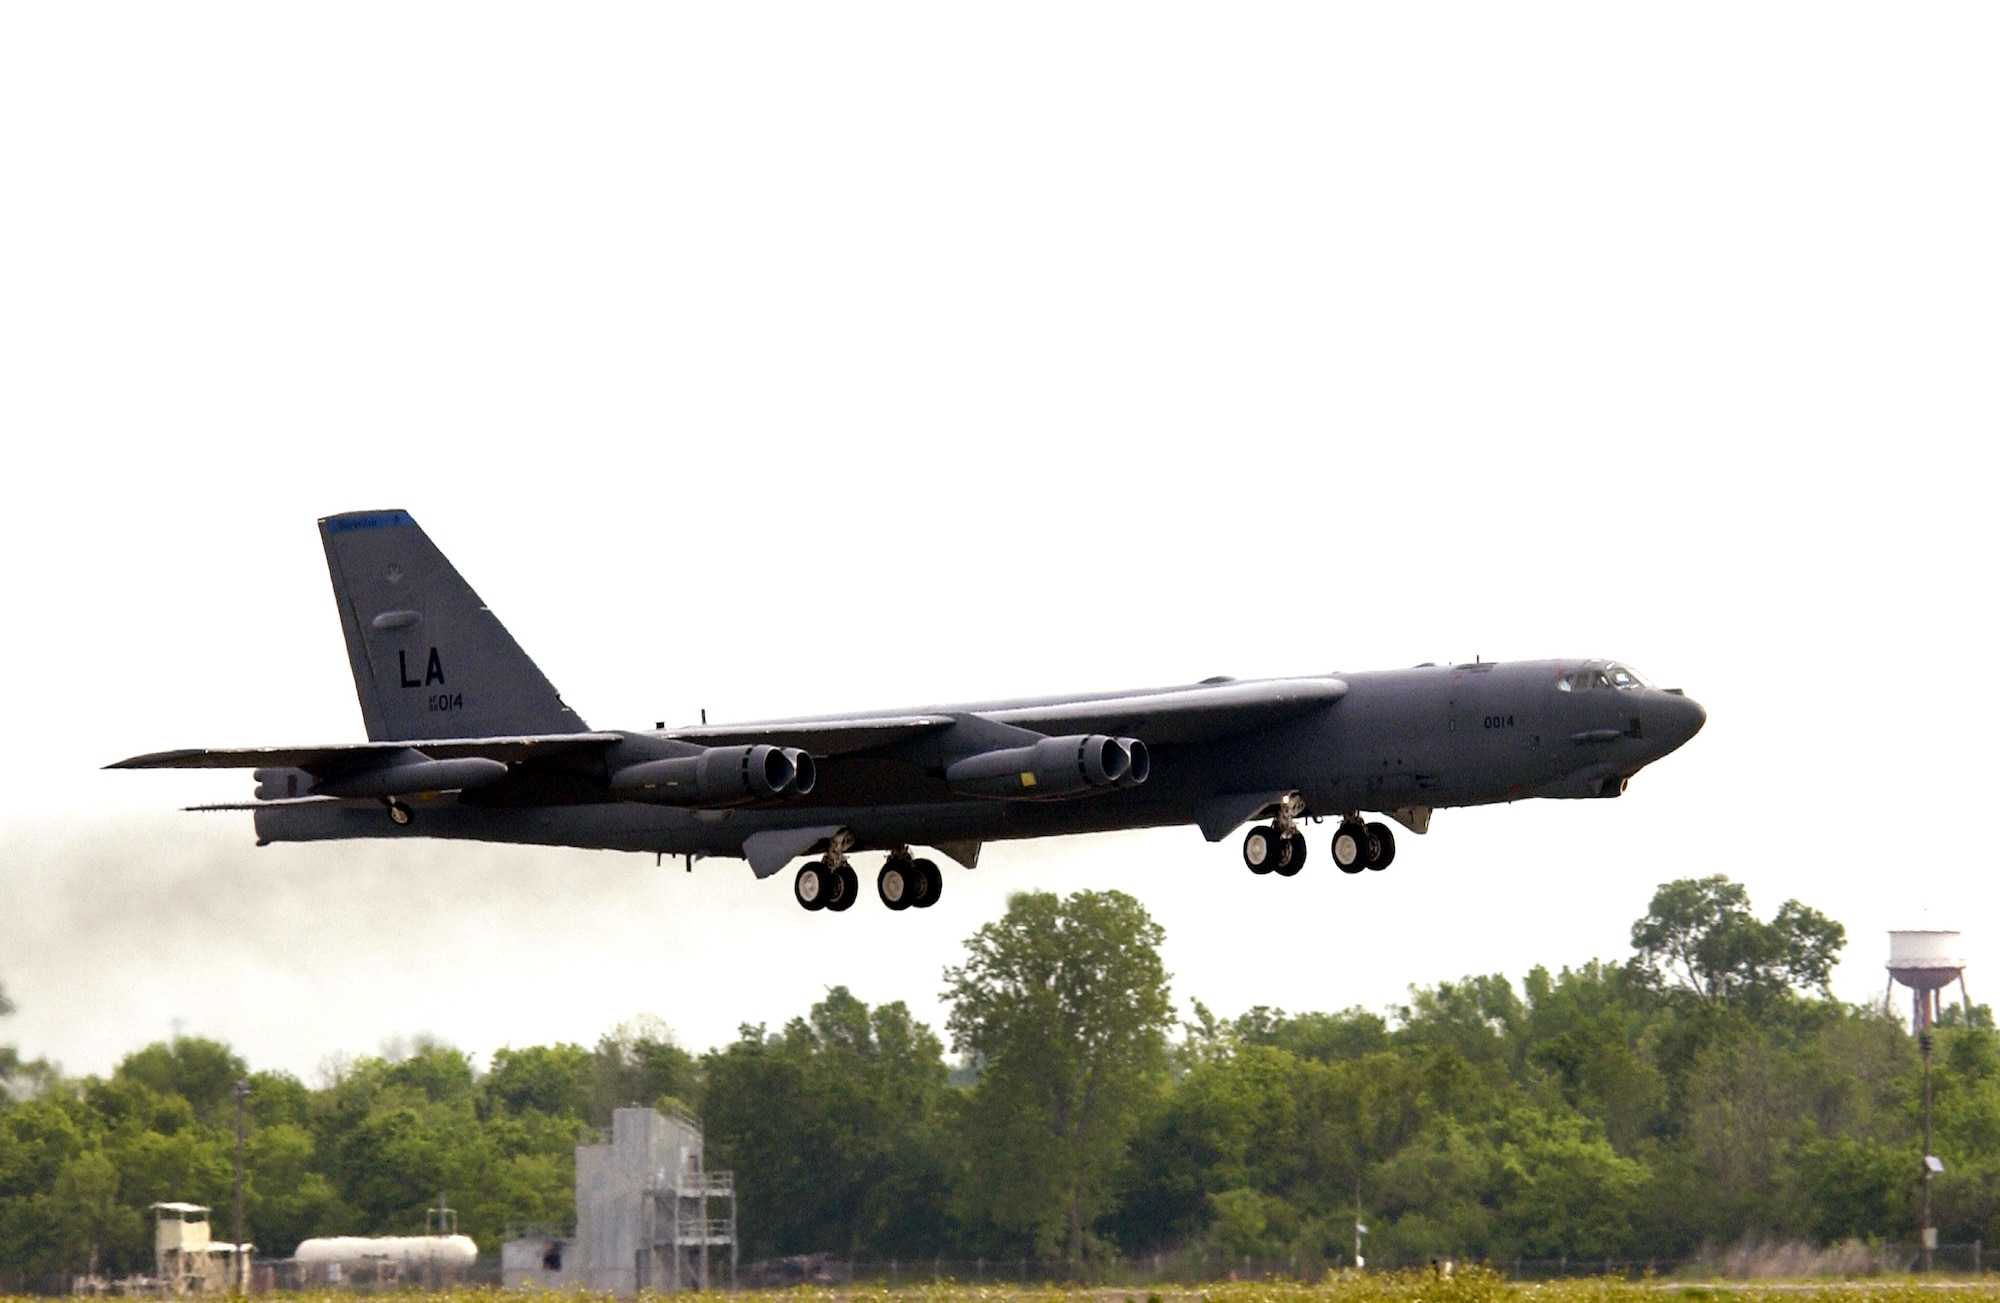 BARKSDALE AIR FORCE BASE, La. -- A B-52 Stratofortress takes off from here.  June 29 marked the bomber's 50th anniversary.  (U.S. Air Force photo)